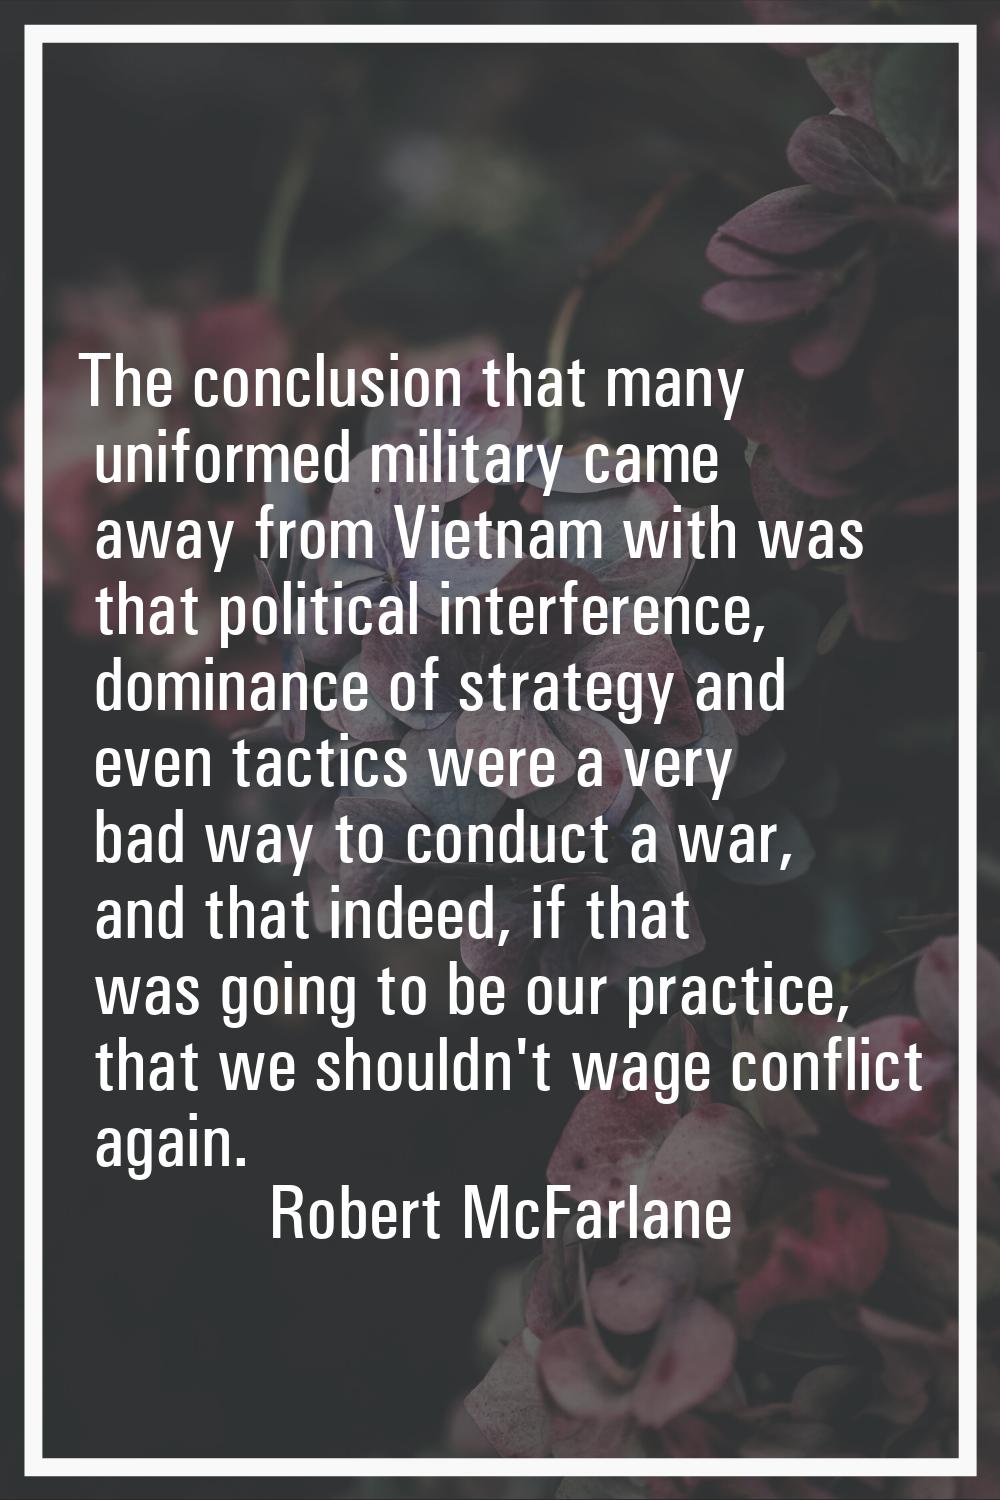 The conclusion that many uniformed military came away from Vietnam with was that political interfer